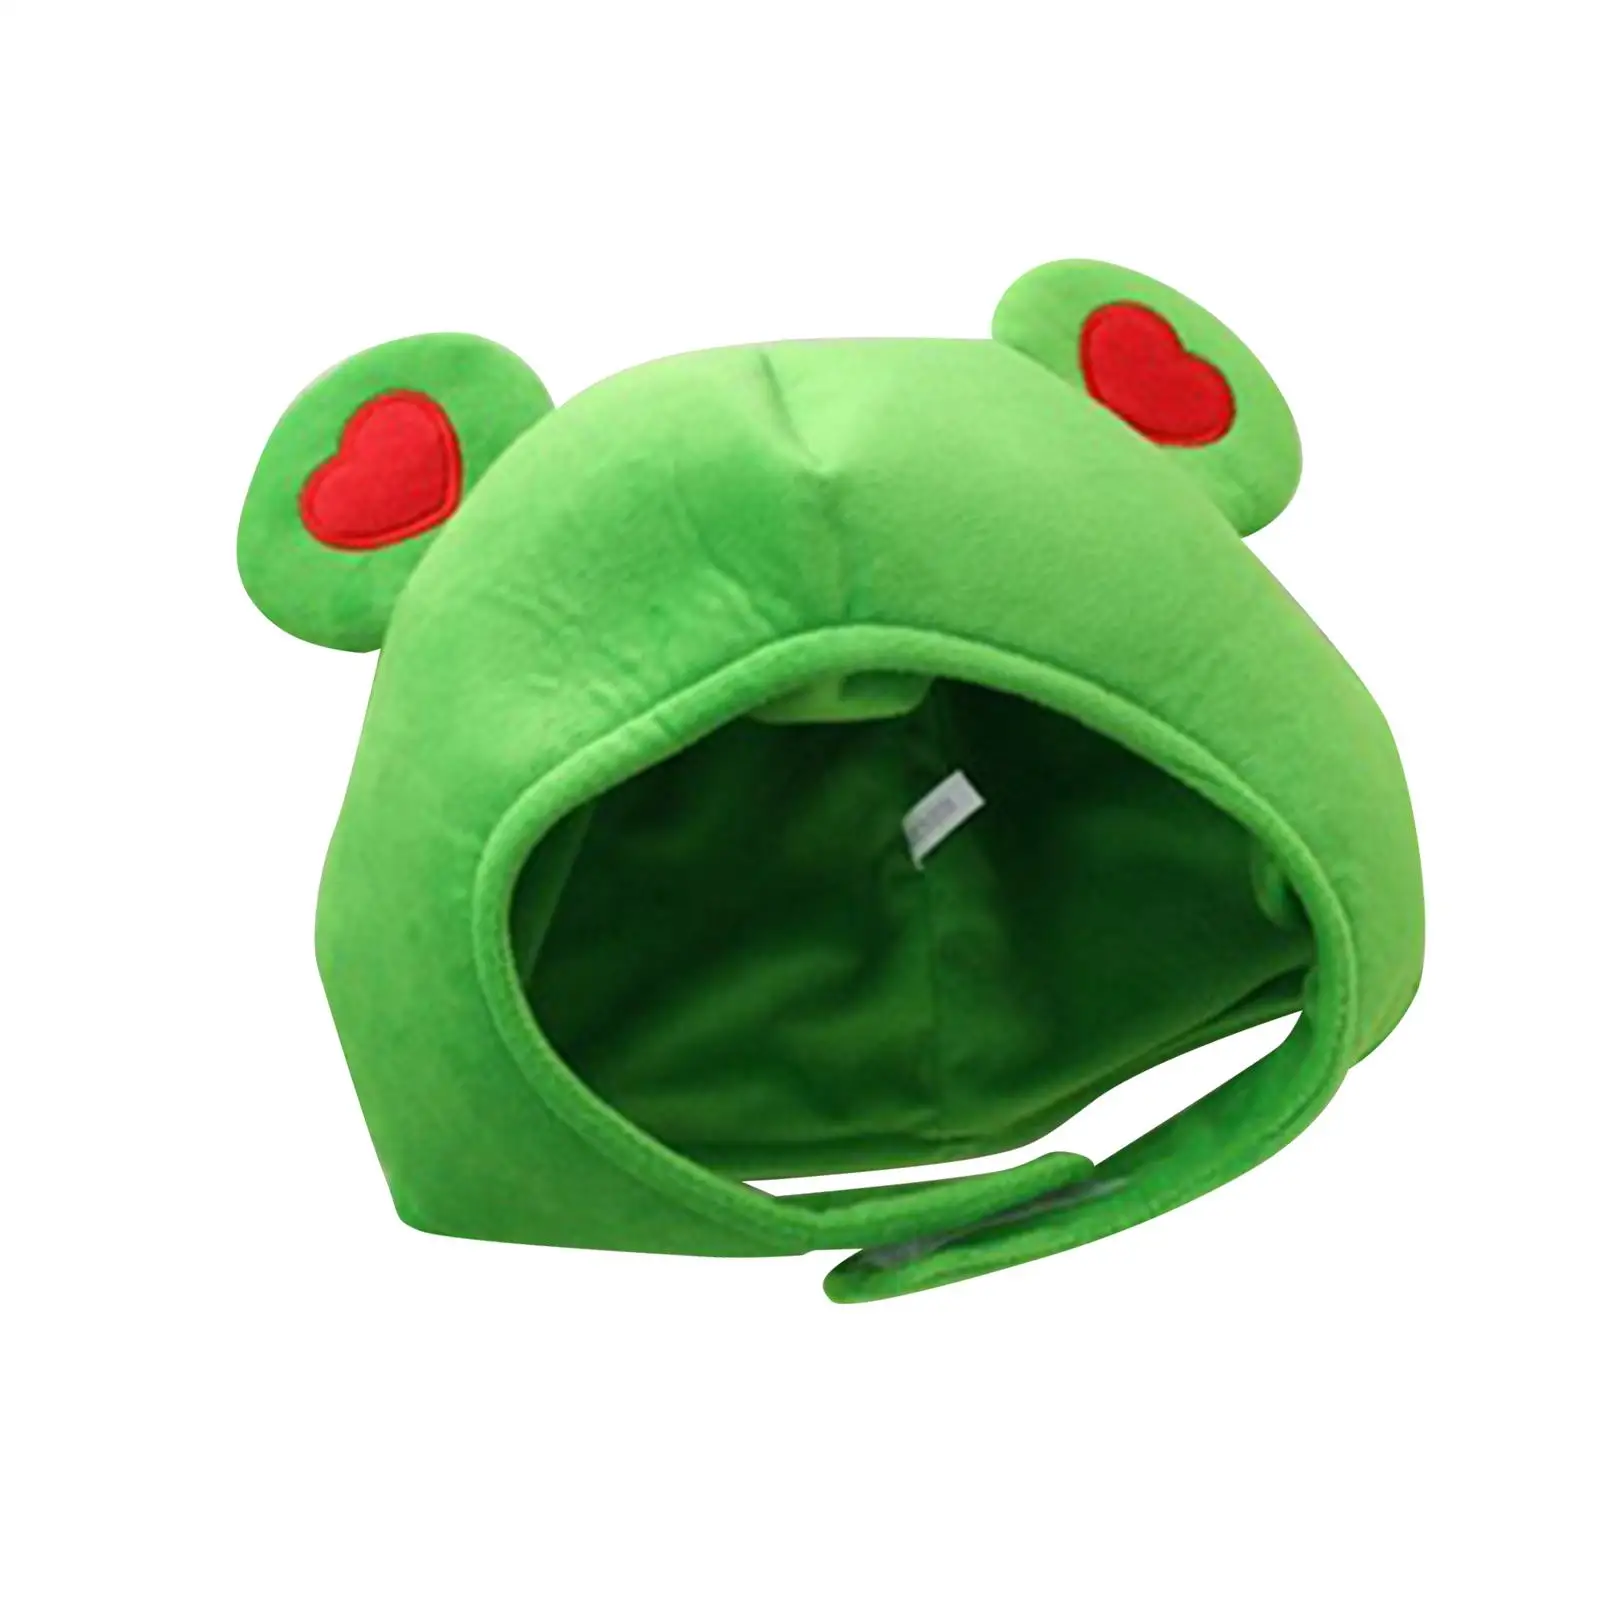 Novelty Plush Frog Hat Dress up Animal Cosplay Adults Cute Warm Photo Props Winter Headwear for Holiday Halloween Party Birthday